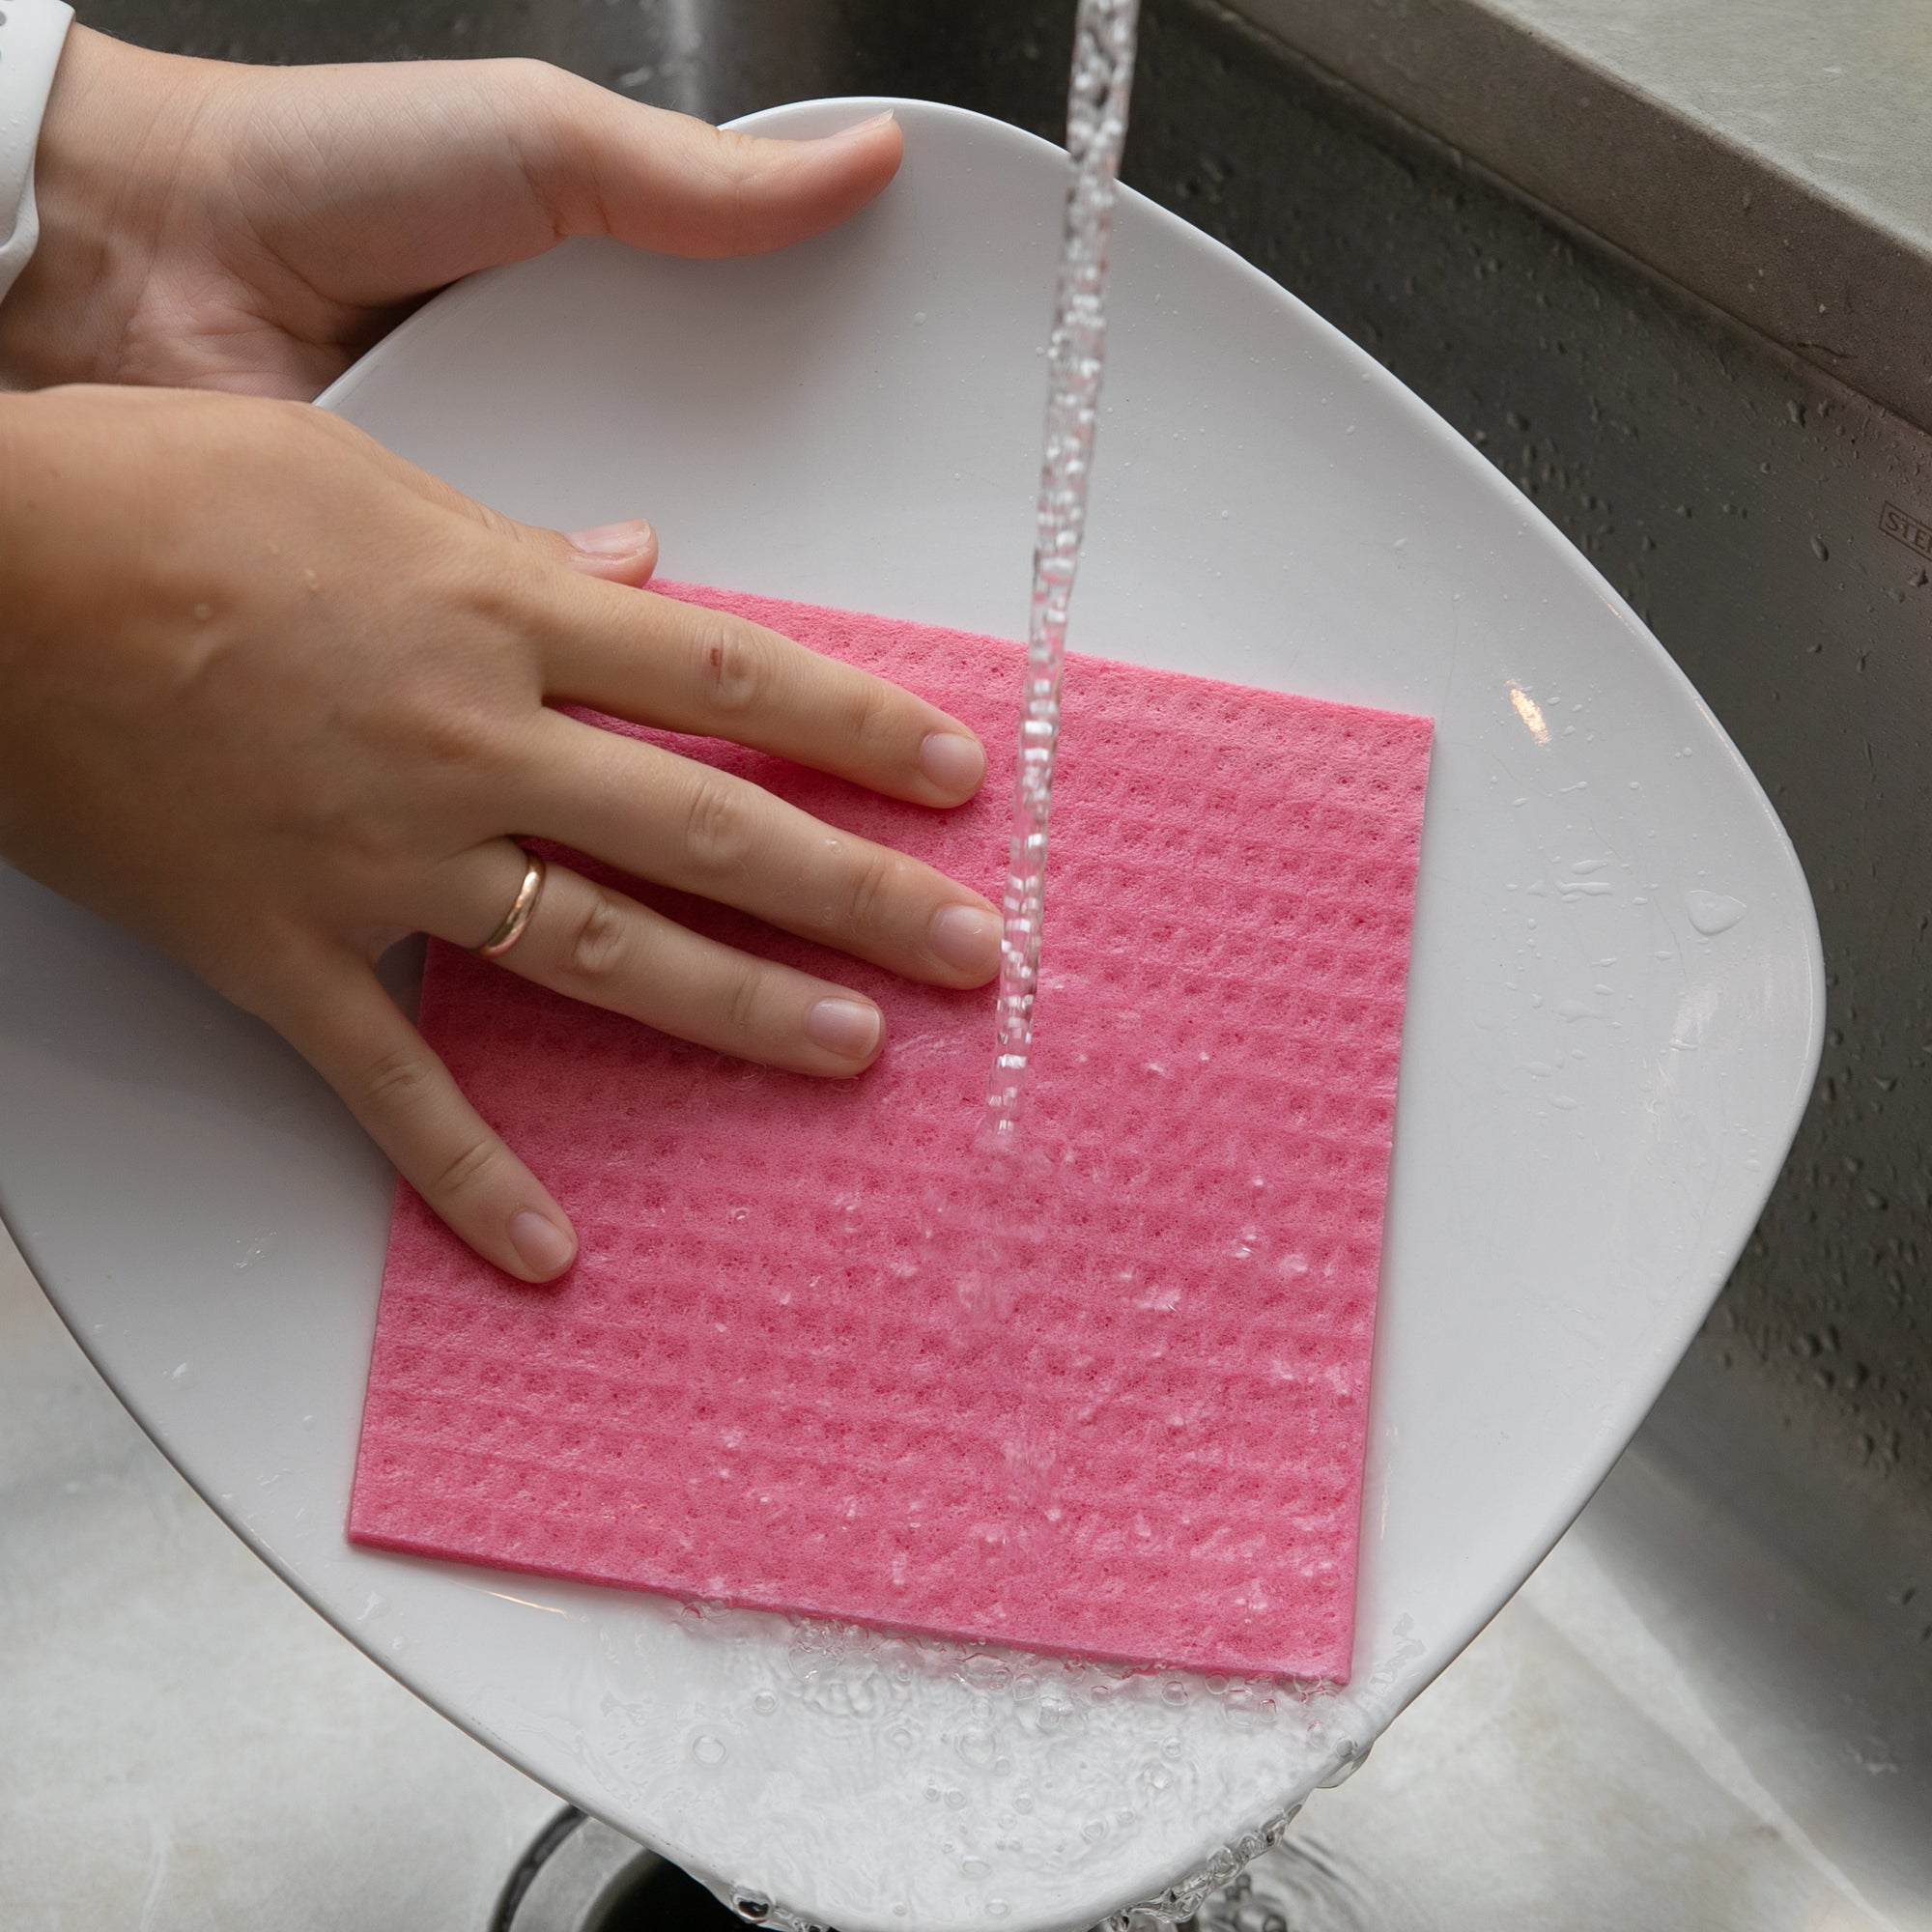 PaperlessKitchen Cleaning Cloth – Environmentally Friendly Cellulose Sponge Cloth and Paper Towel Alternative Is Washable, Reusable and Biodegradable